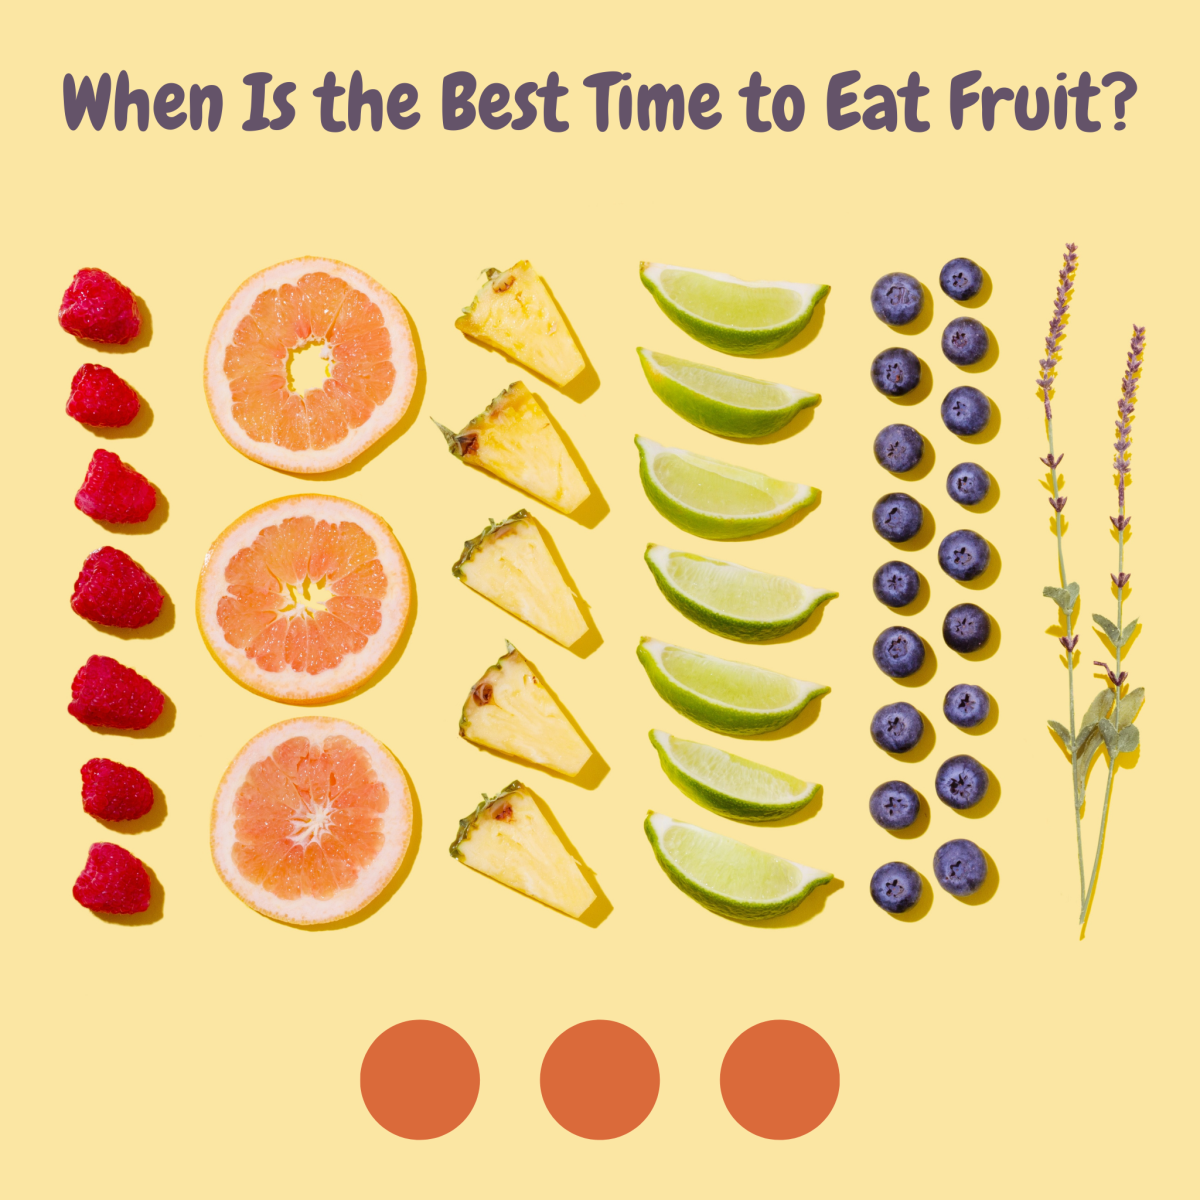 Fruits are always good to eat, but when should you eat them? 